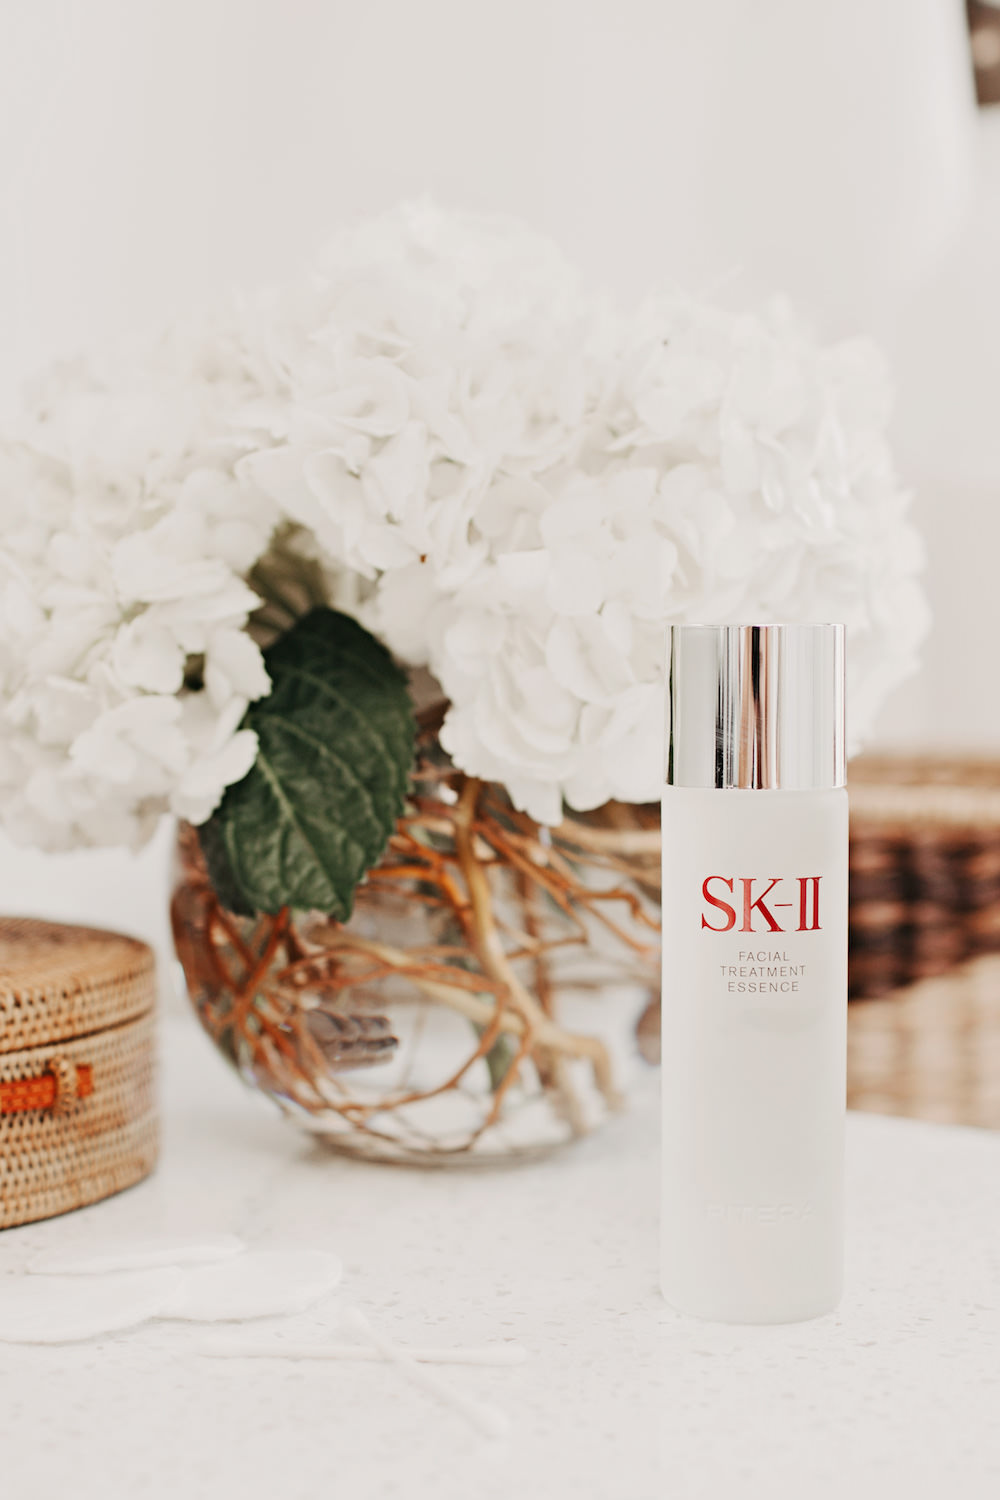 SK-II Facial Treatment Essence by Dash of Darling